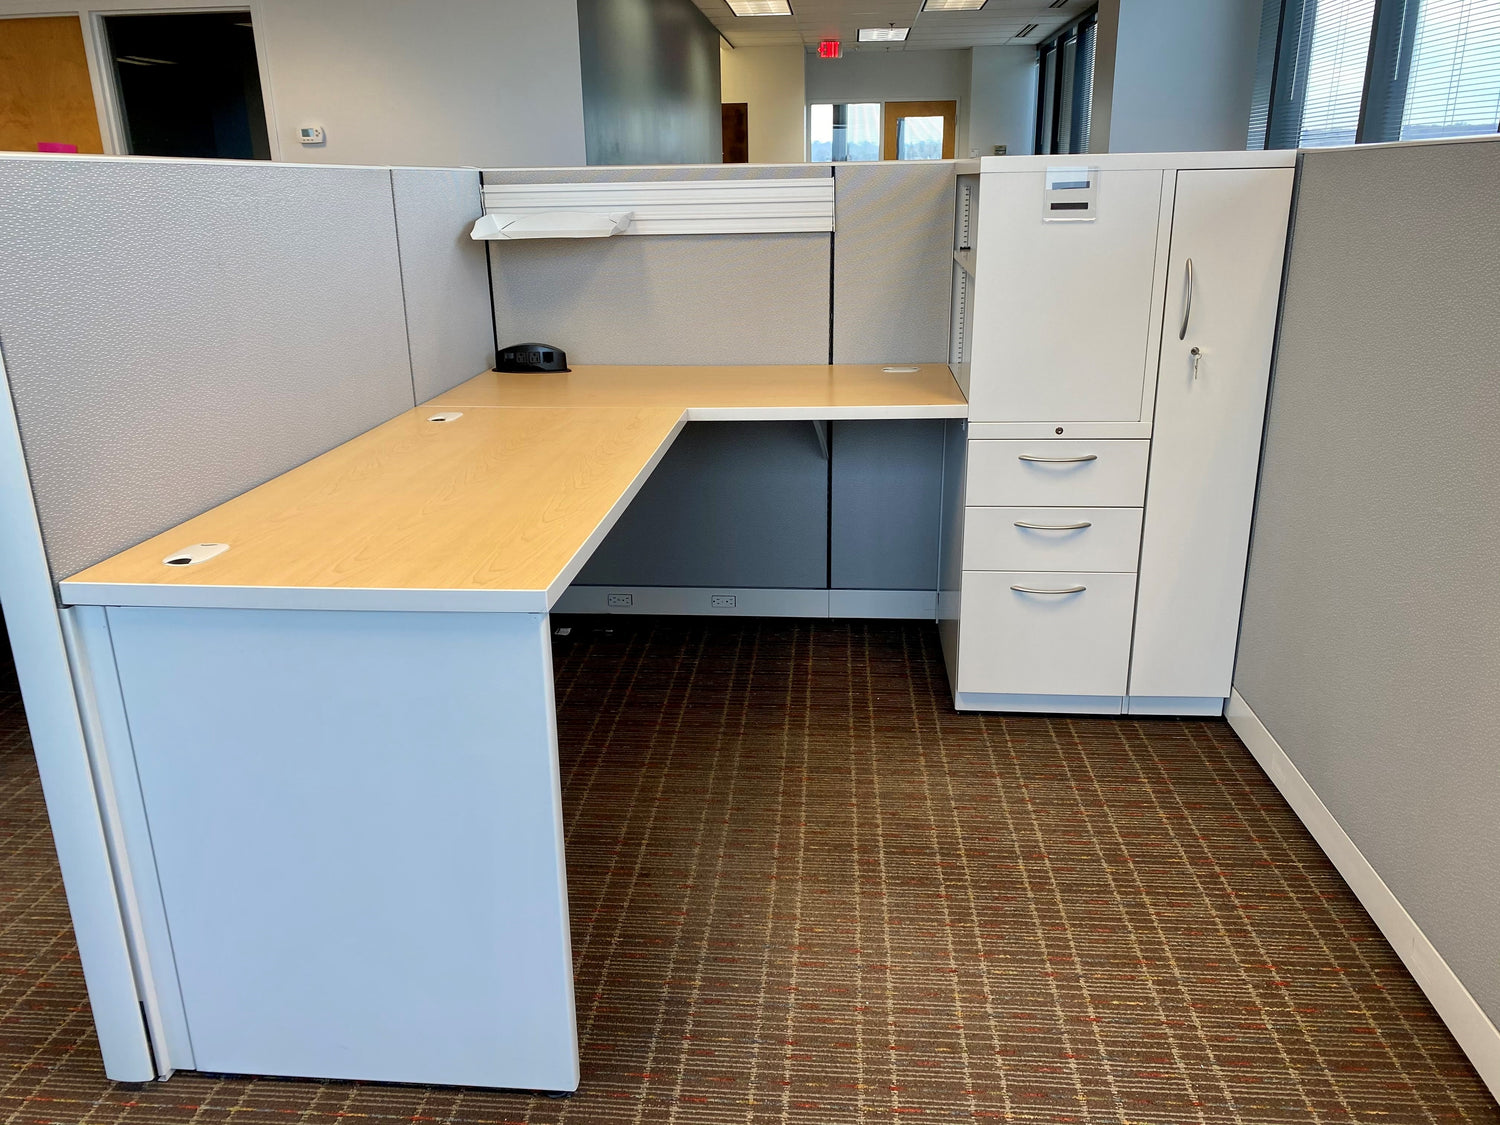 Allsteel Maxon Office Cubicles. Item Highlights: Large Storage Volume, Coat Rack, Overhead Rack for items, 2-Tone Panels, and End Leg Cover